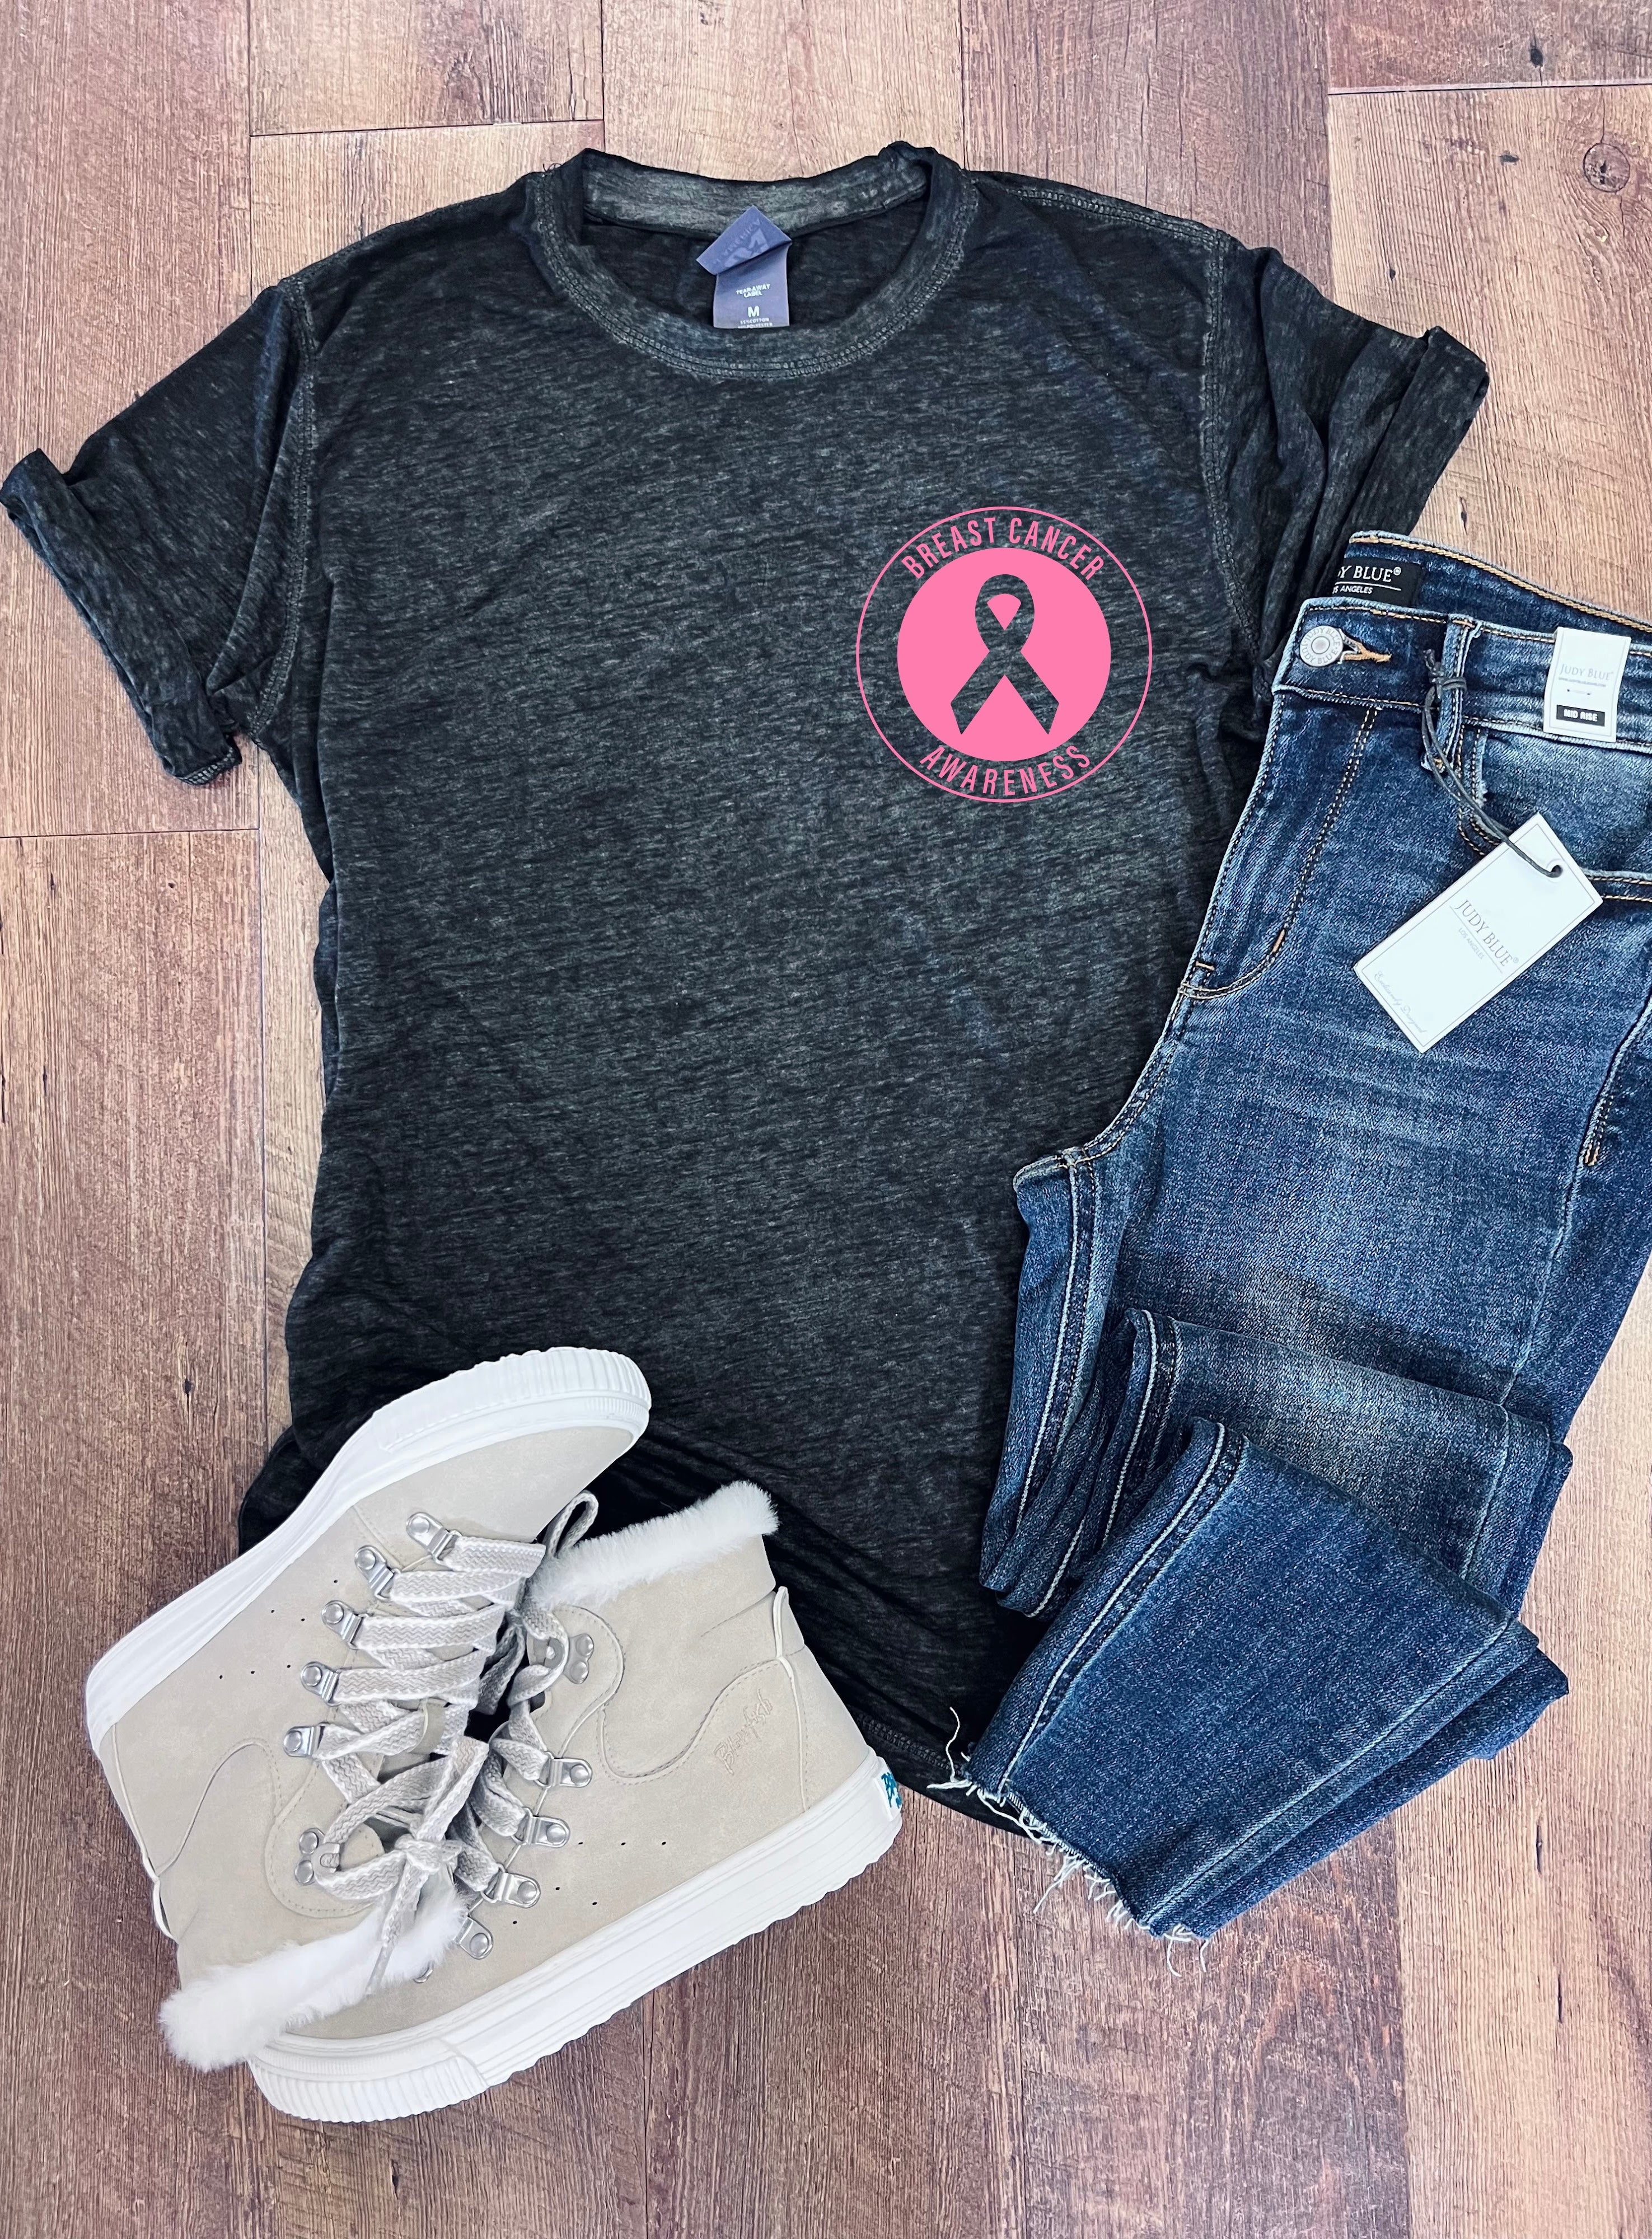 Breast Cancer Awareness Month Tees